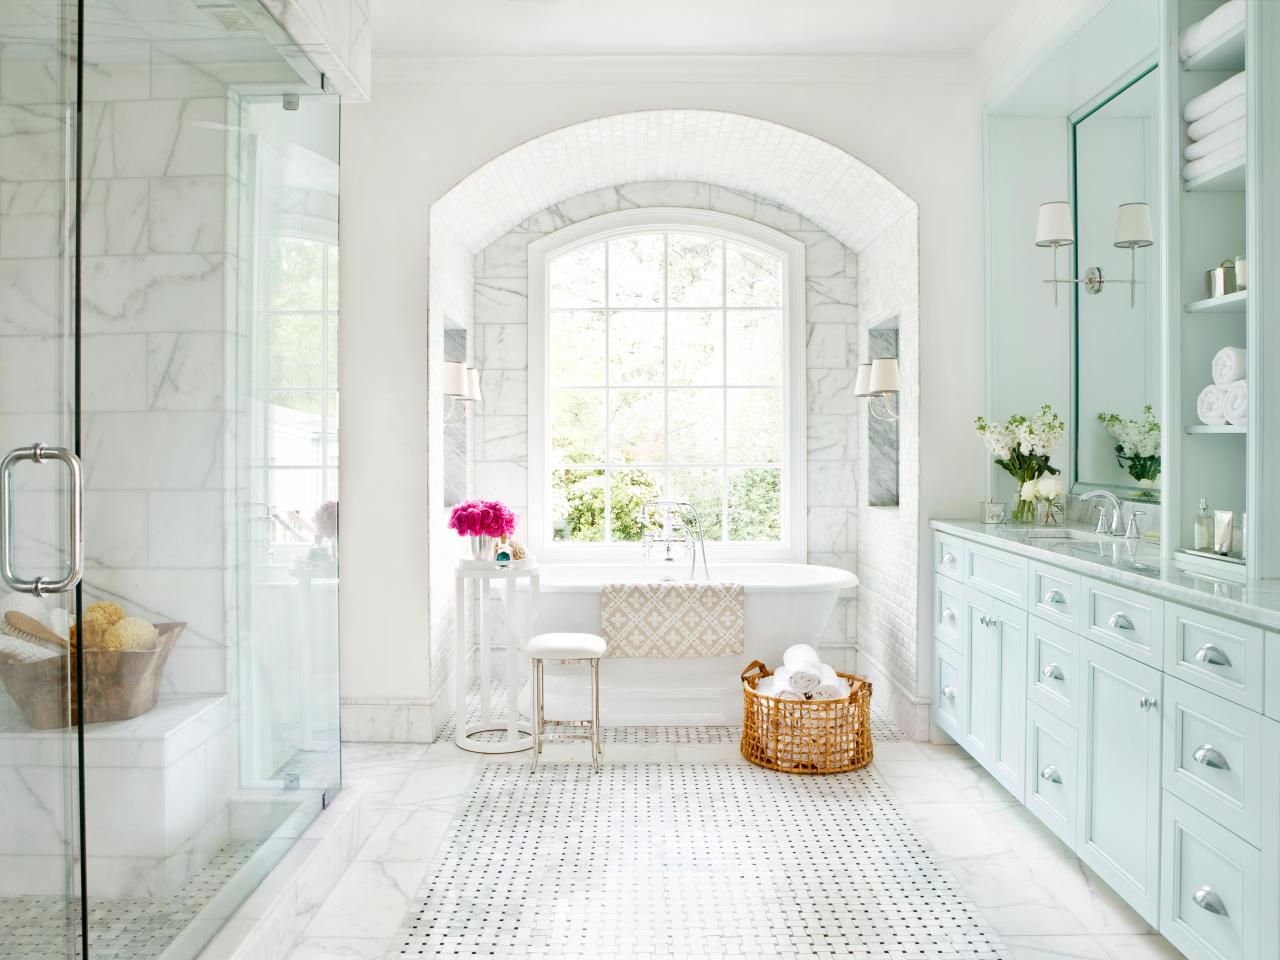 6 Design Ideas for Tile Rugs - This Old House